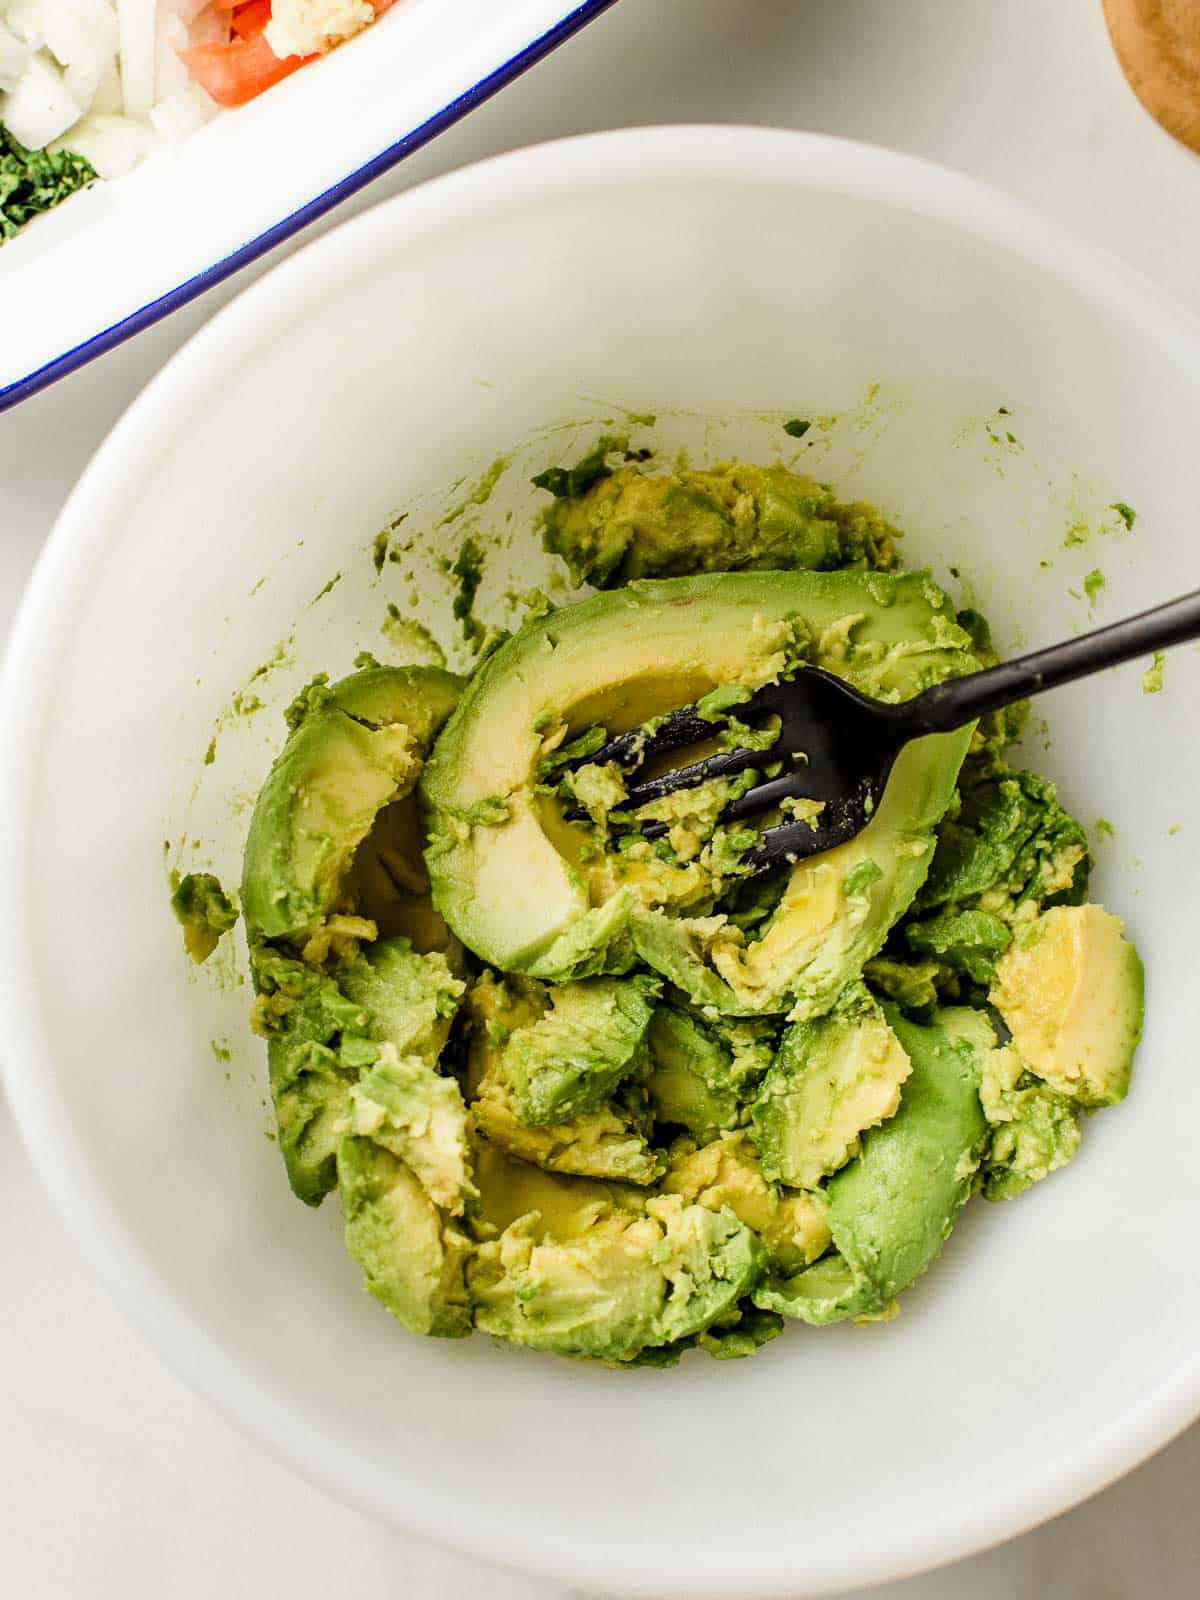 Mashed avocado in a bowl with a fork.